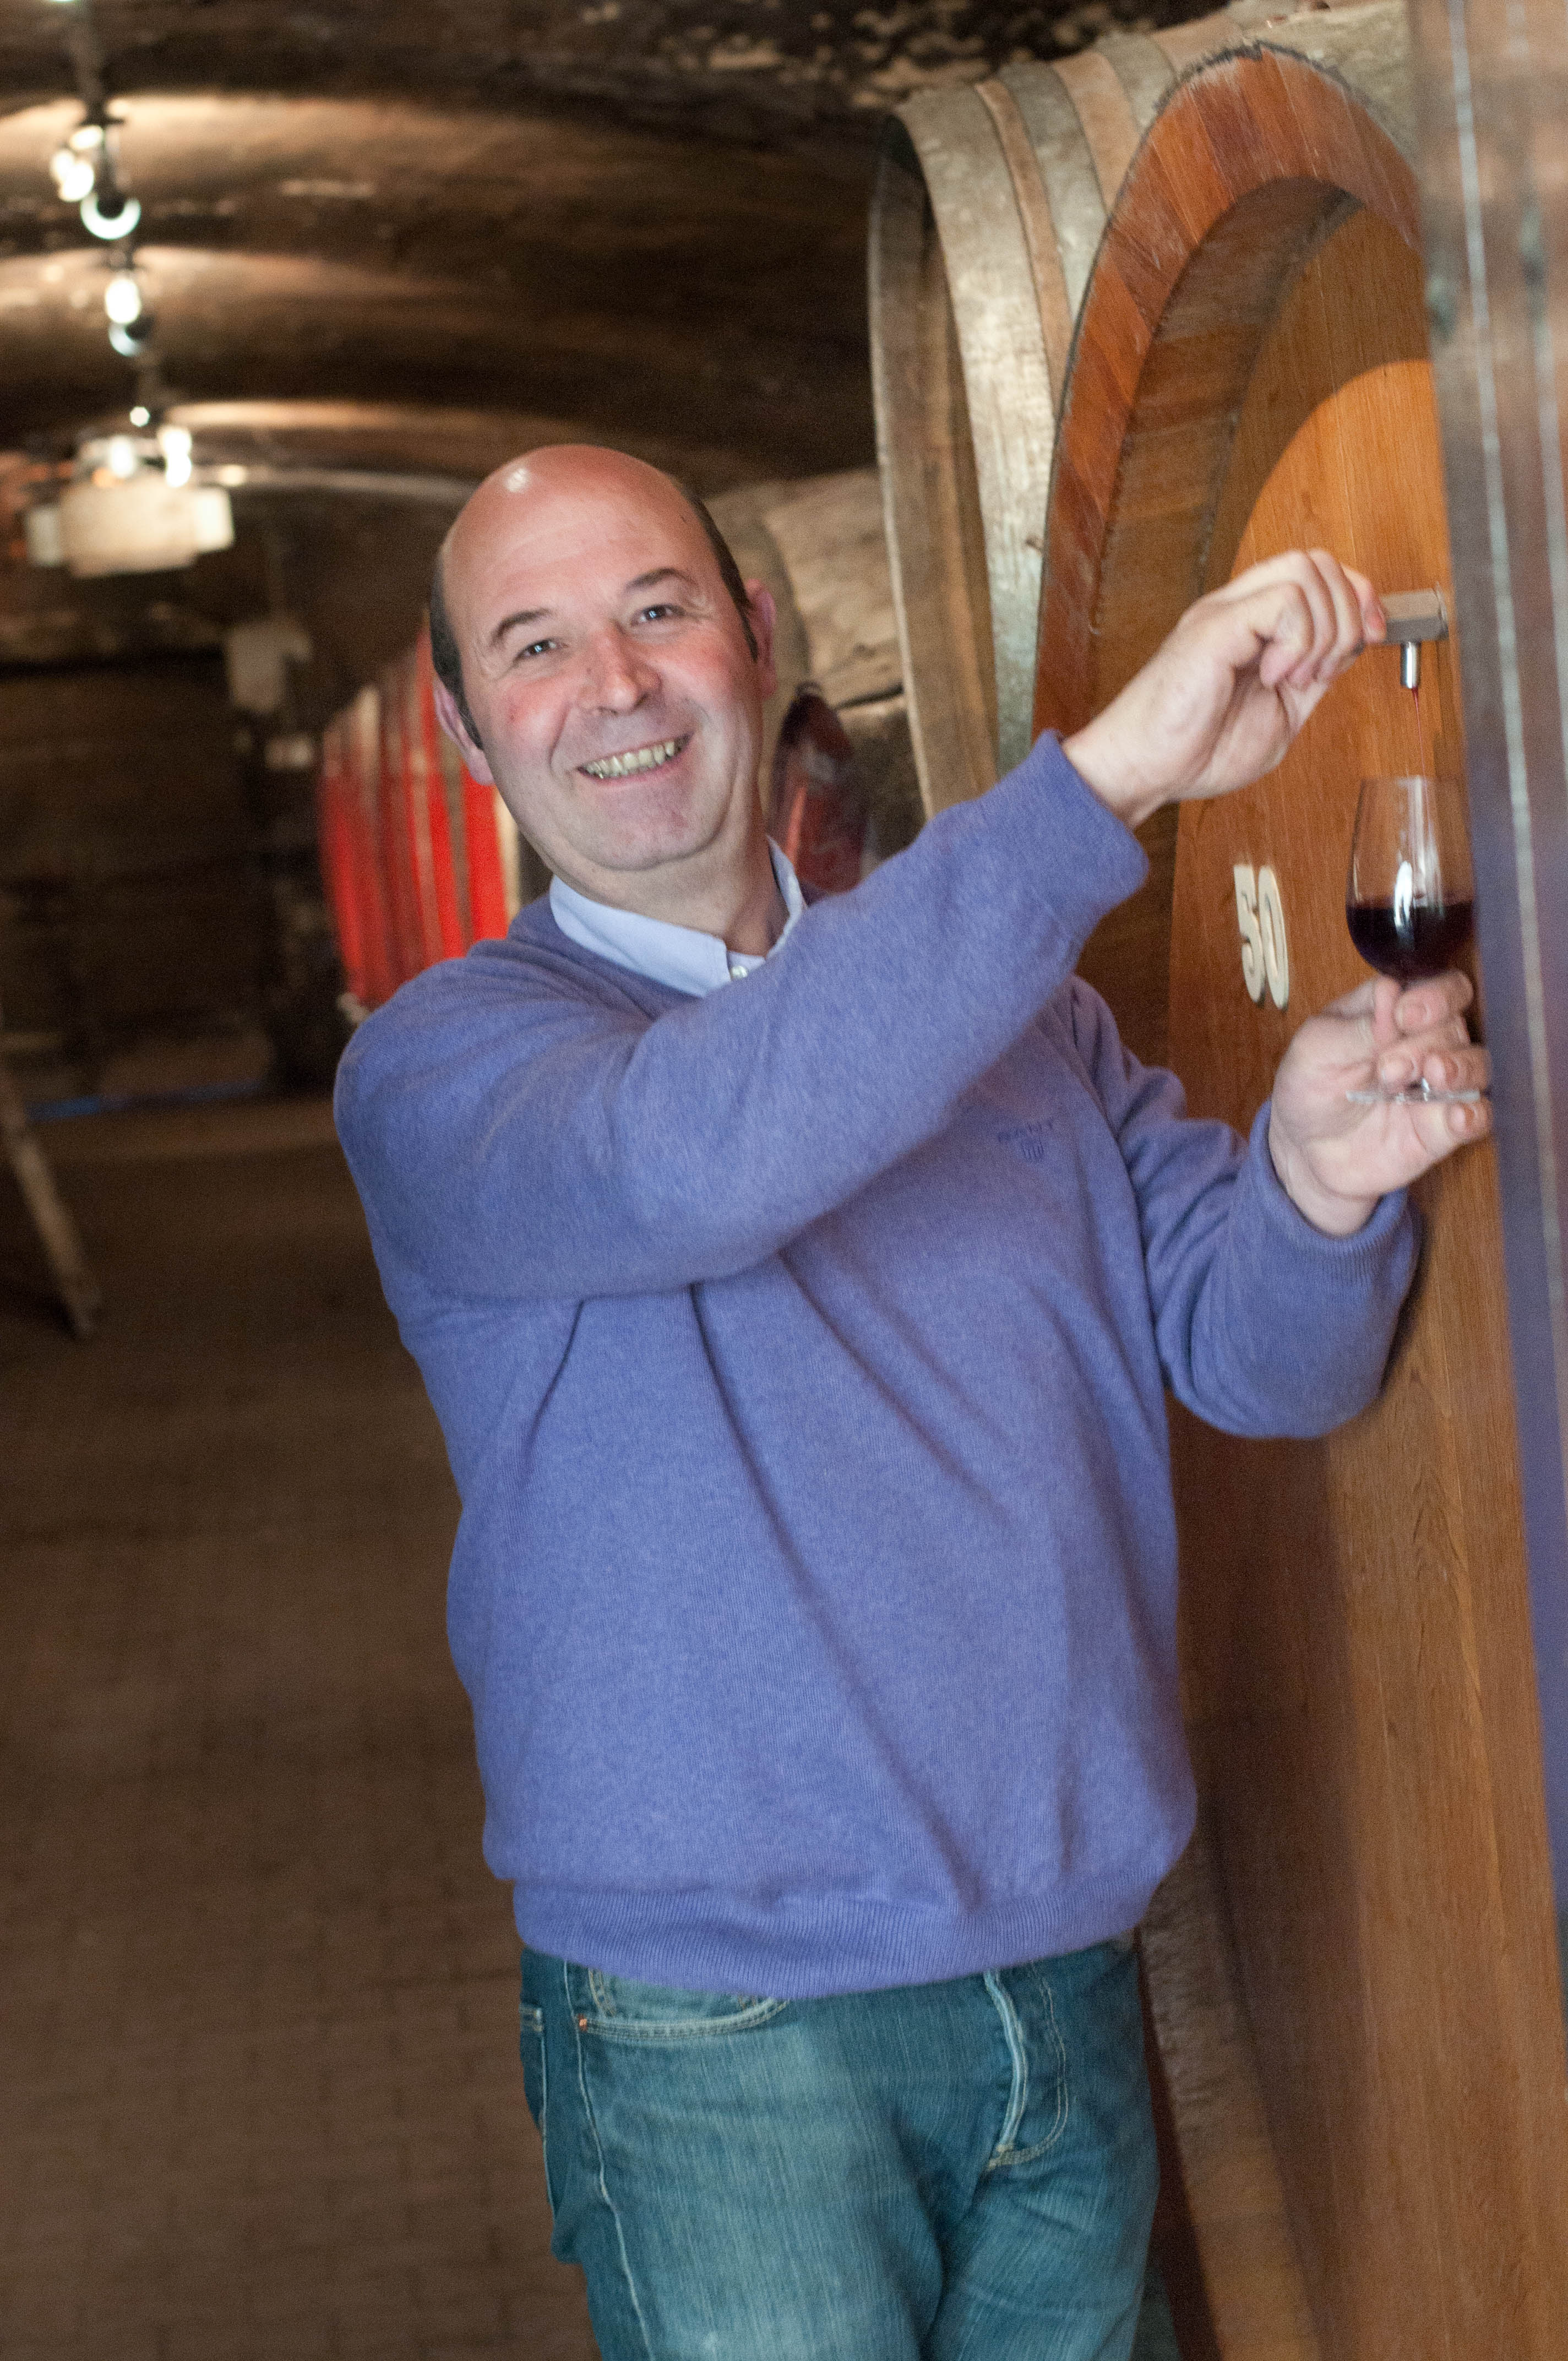 Pierre-Marie Chermette French wine maker beaujolais Fleurie in his cellar